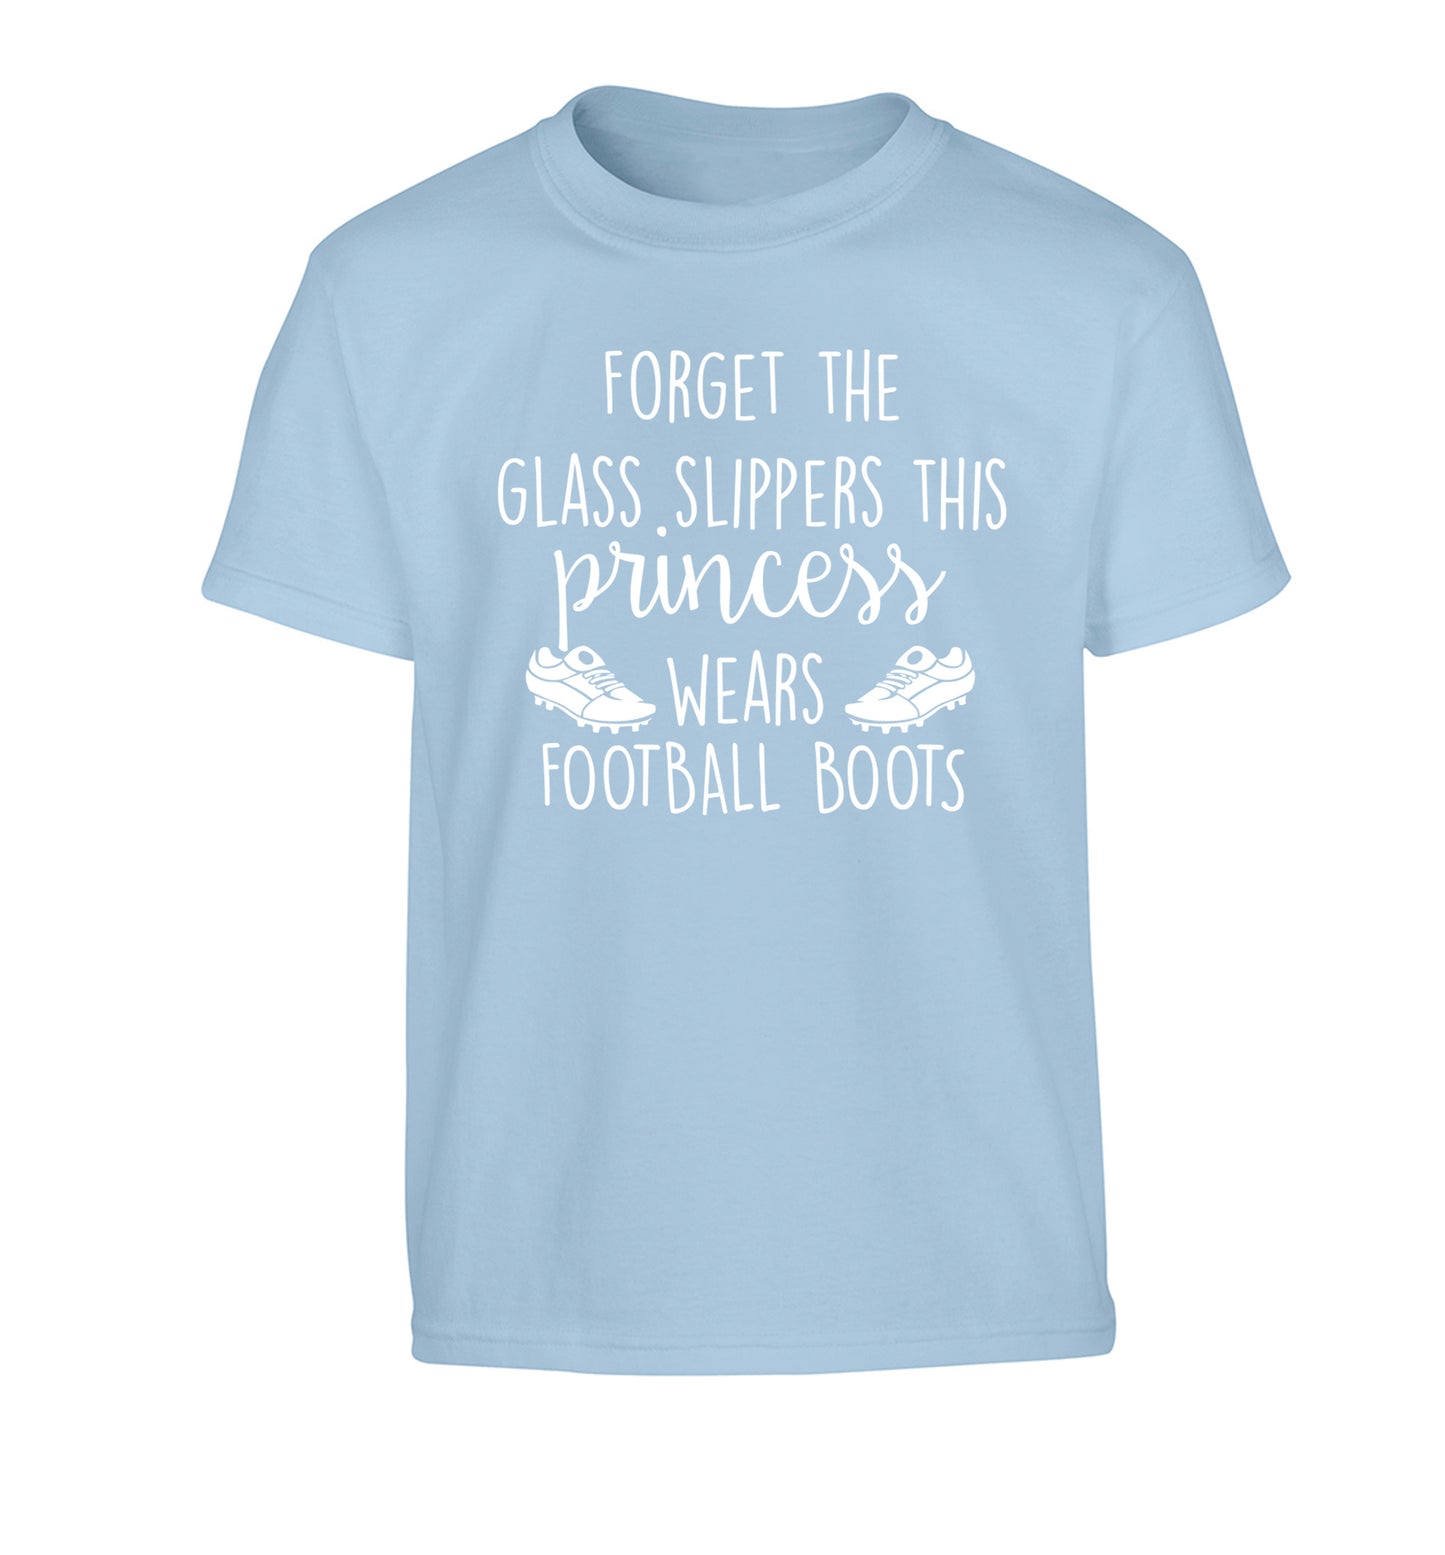 Forget the glass slippers this princess wears football boots Children's light blue Tshirt 12-14 Years